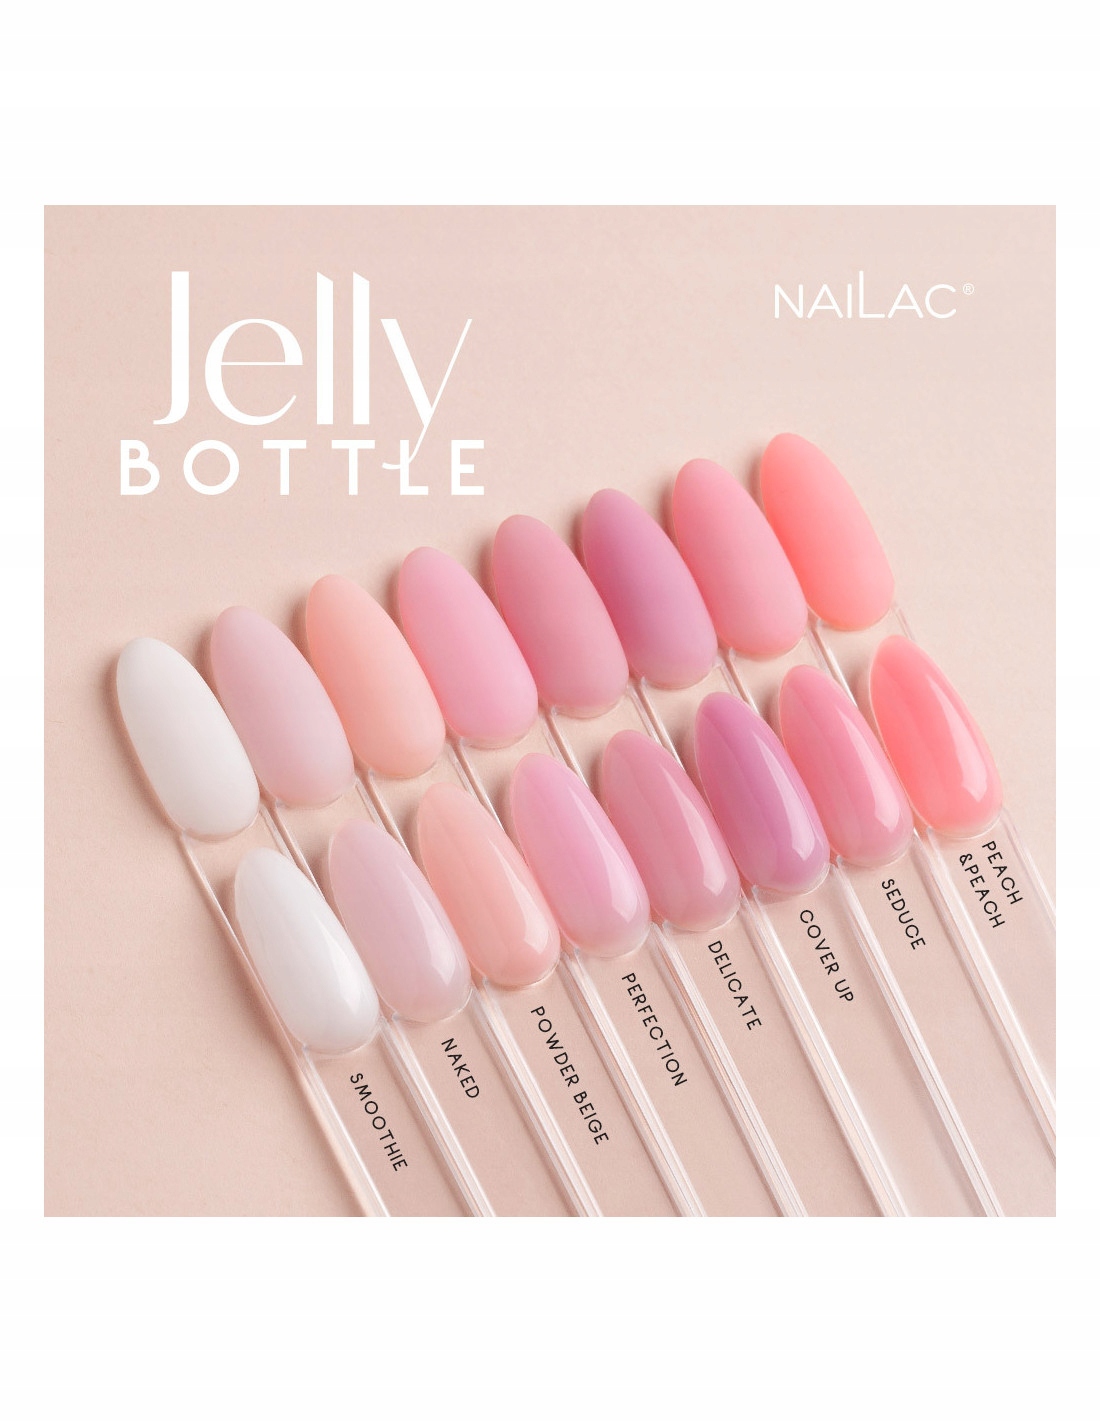 NAILAC Jelly Bottle Delicate 7ml